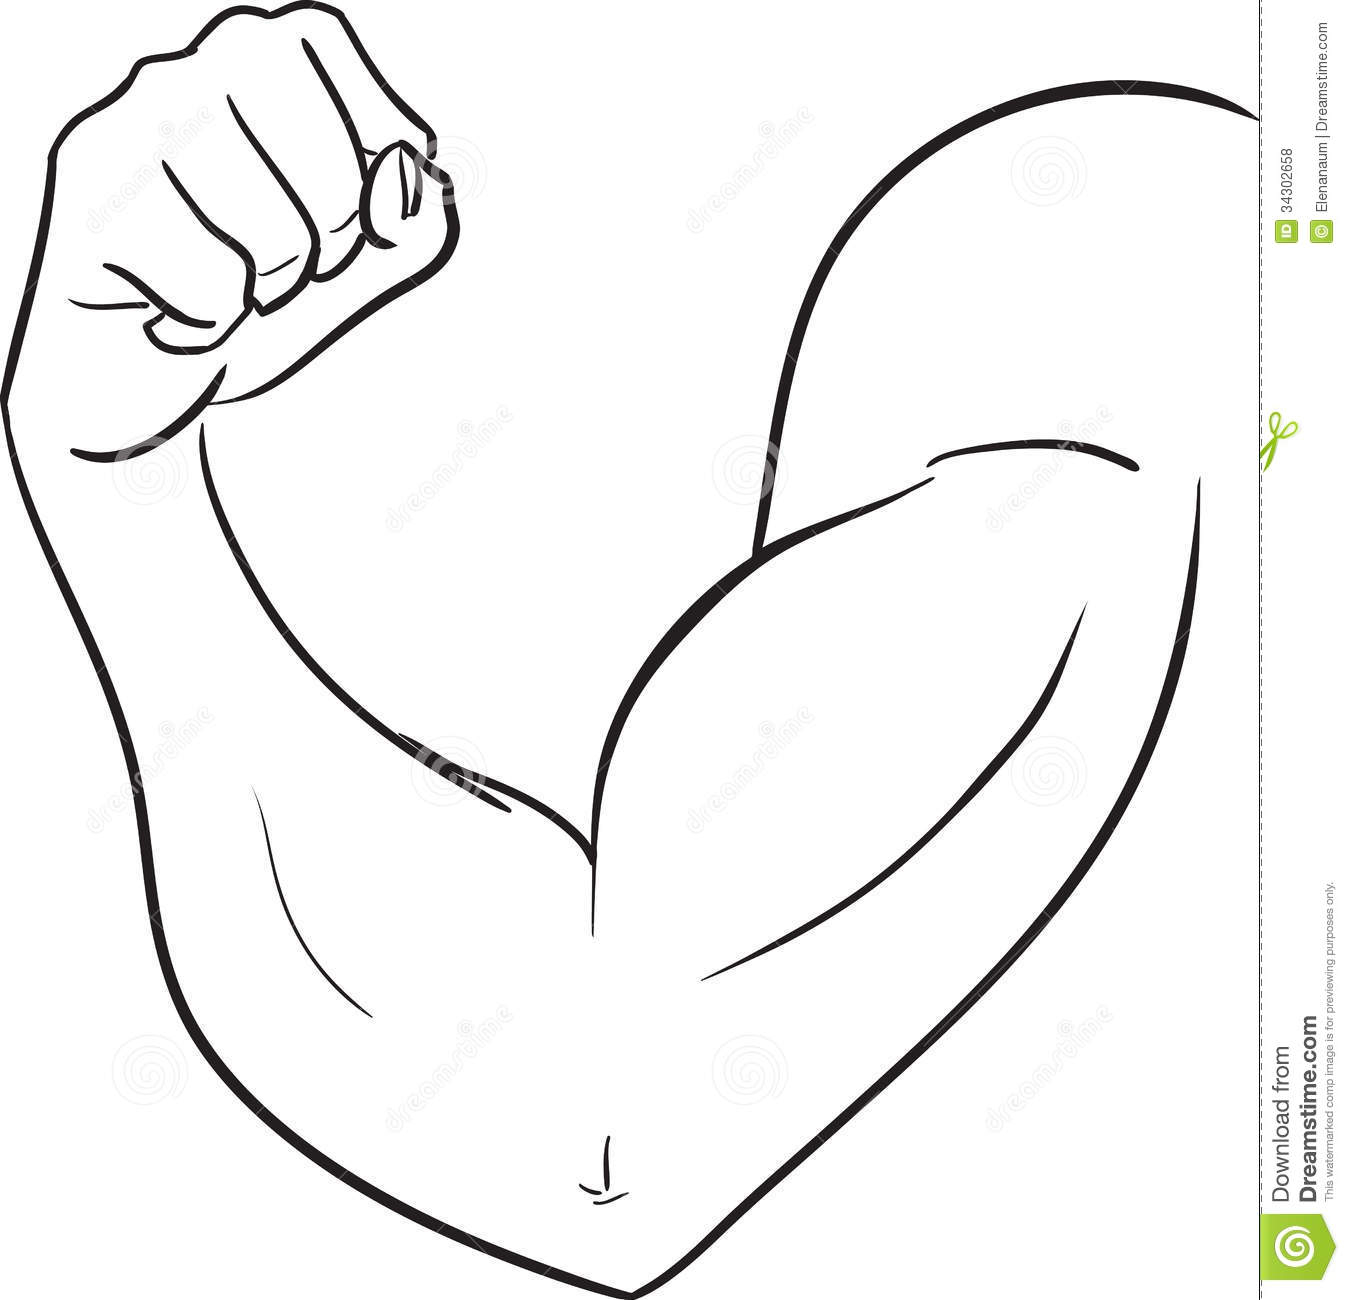 Strong free download best. Arm clipart drawing